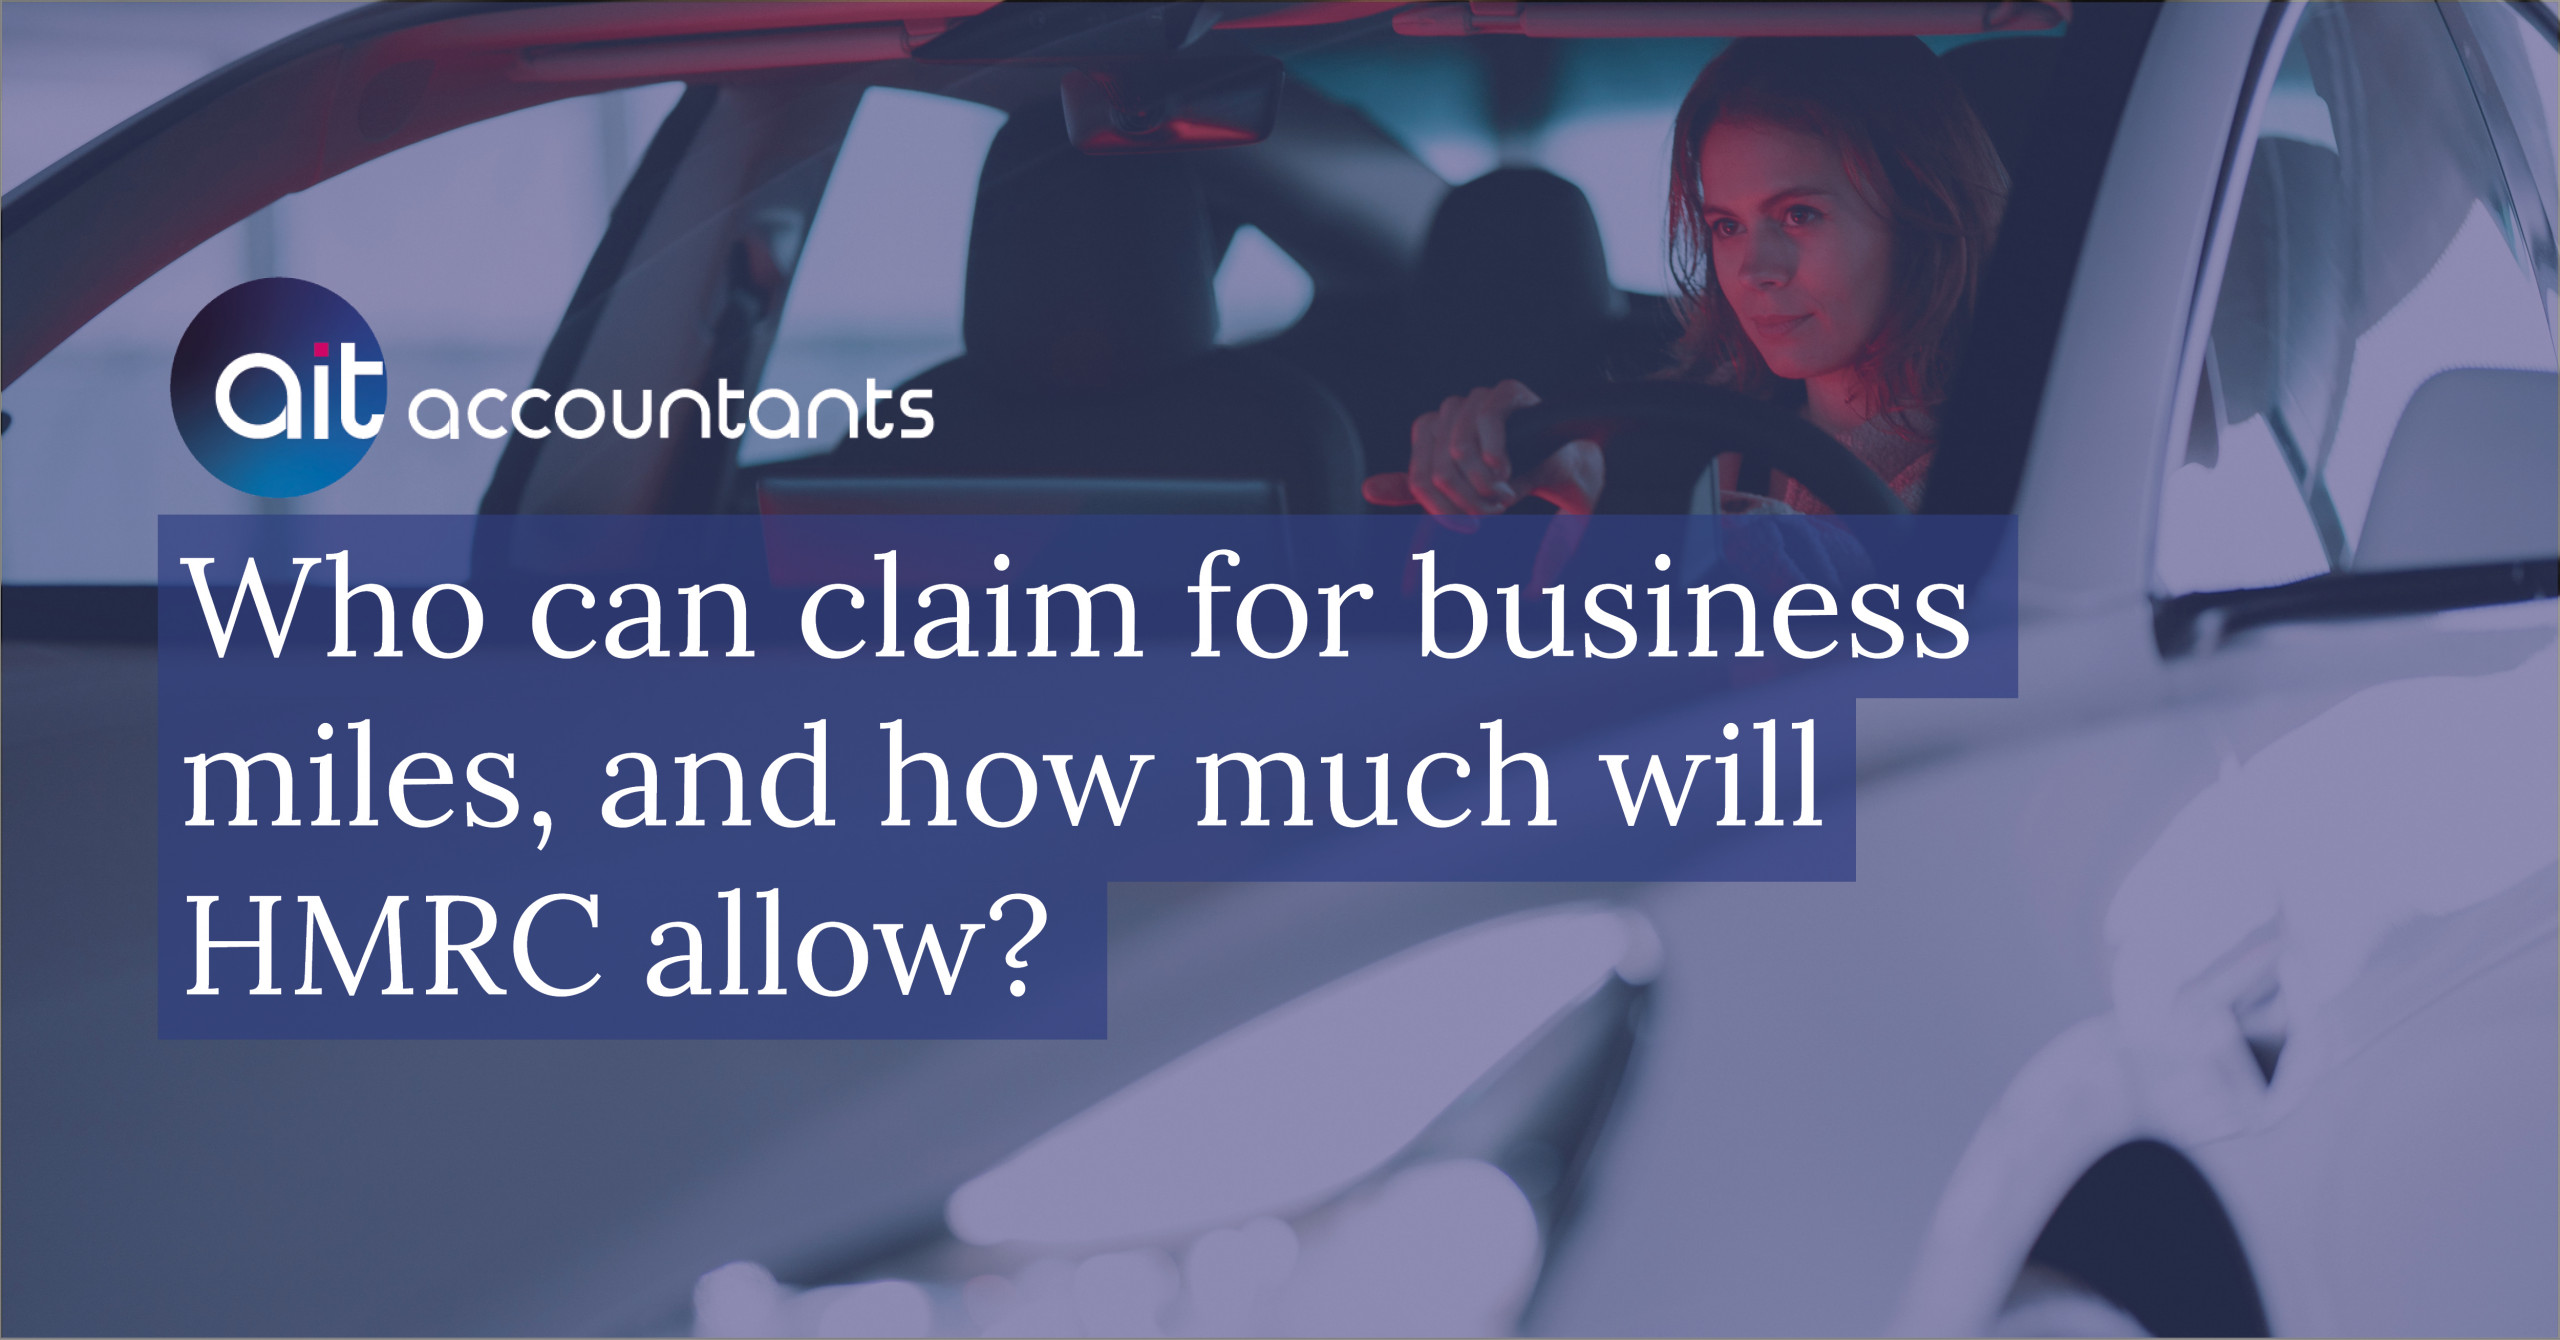 Who can claim for business miles, and how much will HMRC allow? AIT